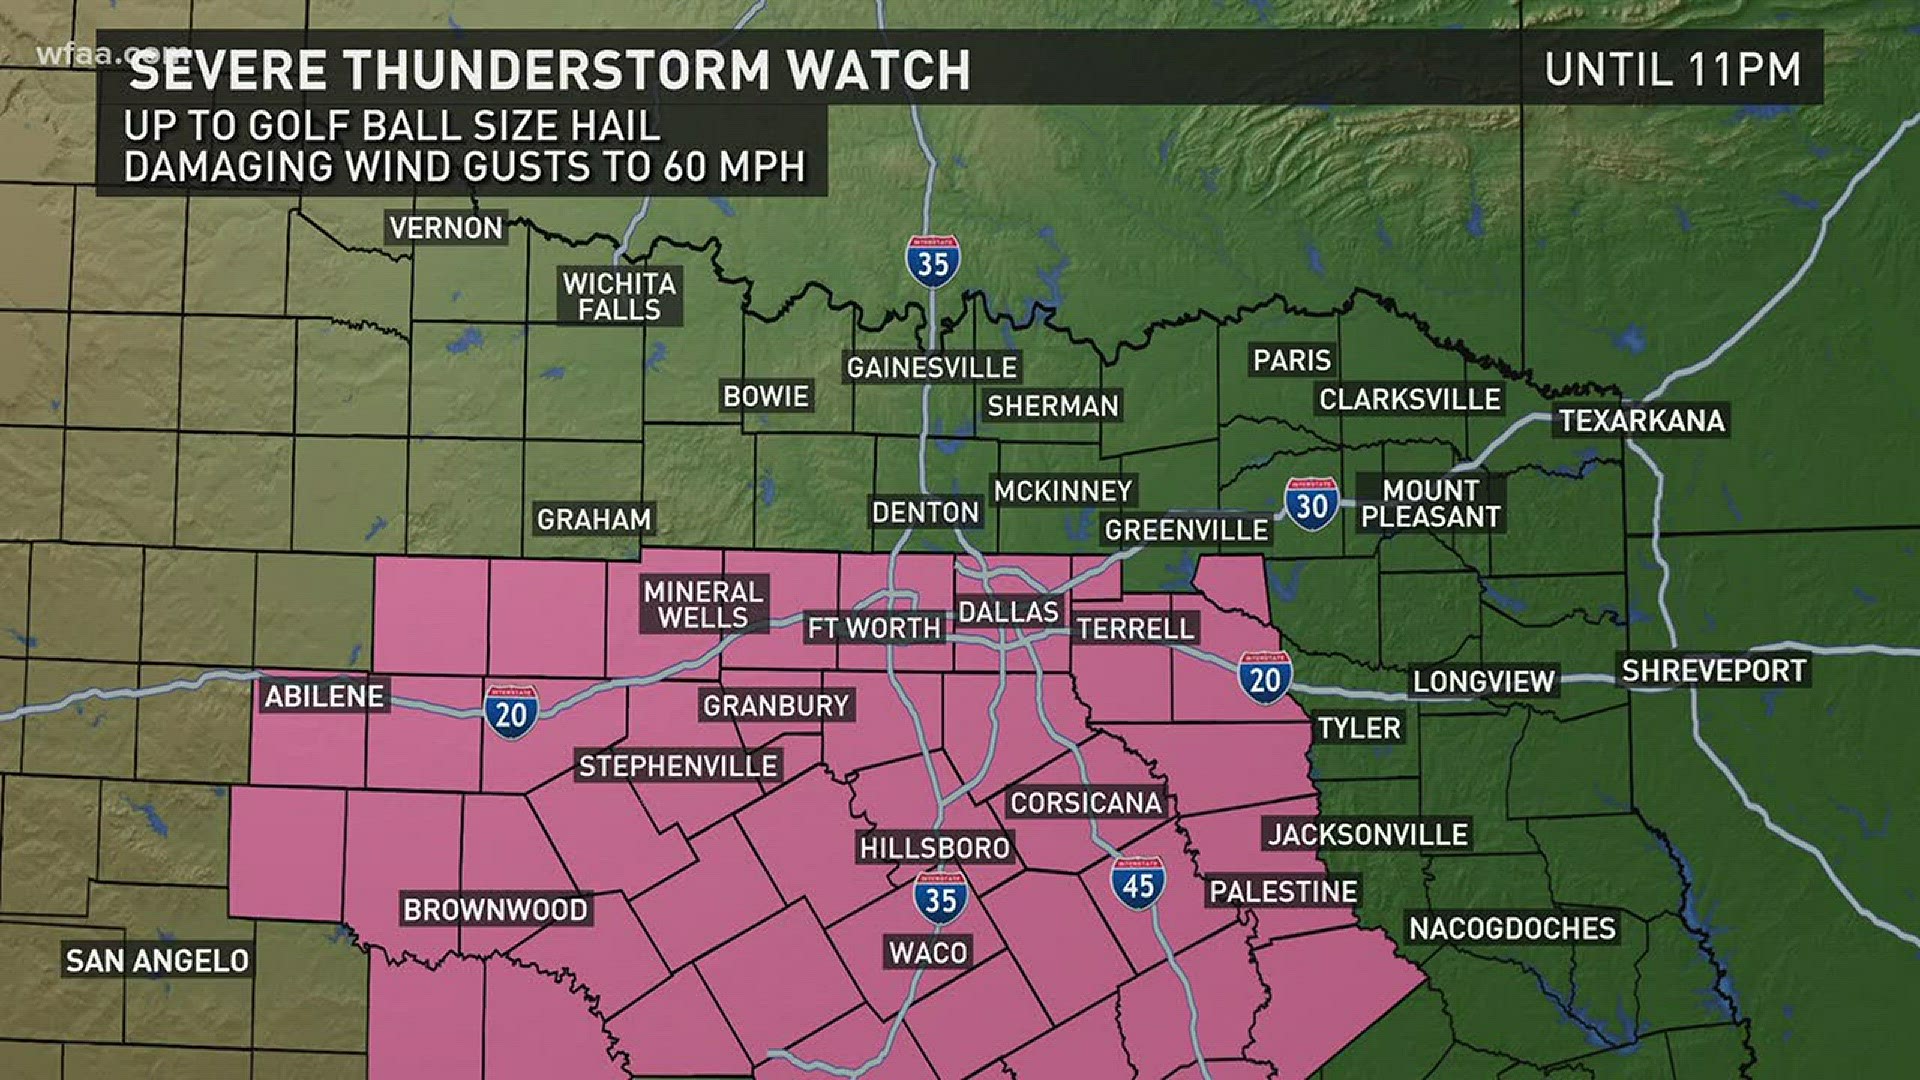 Parts of North Texas were under a severe thunderstorm watch.